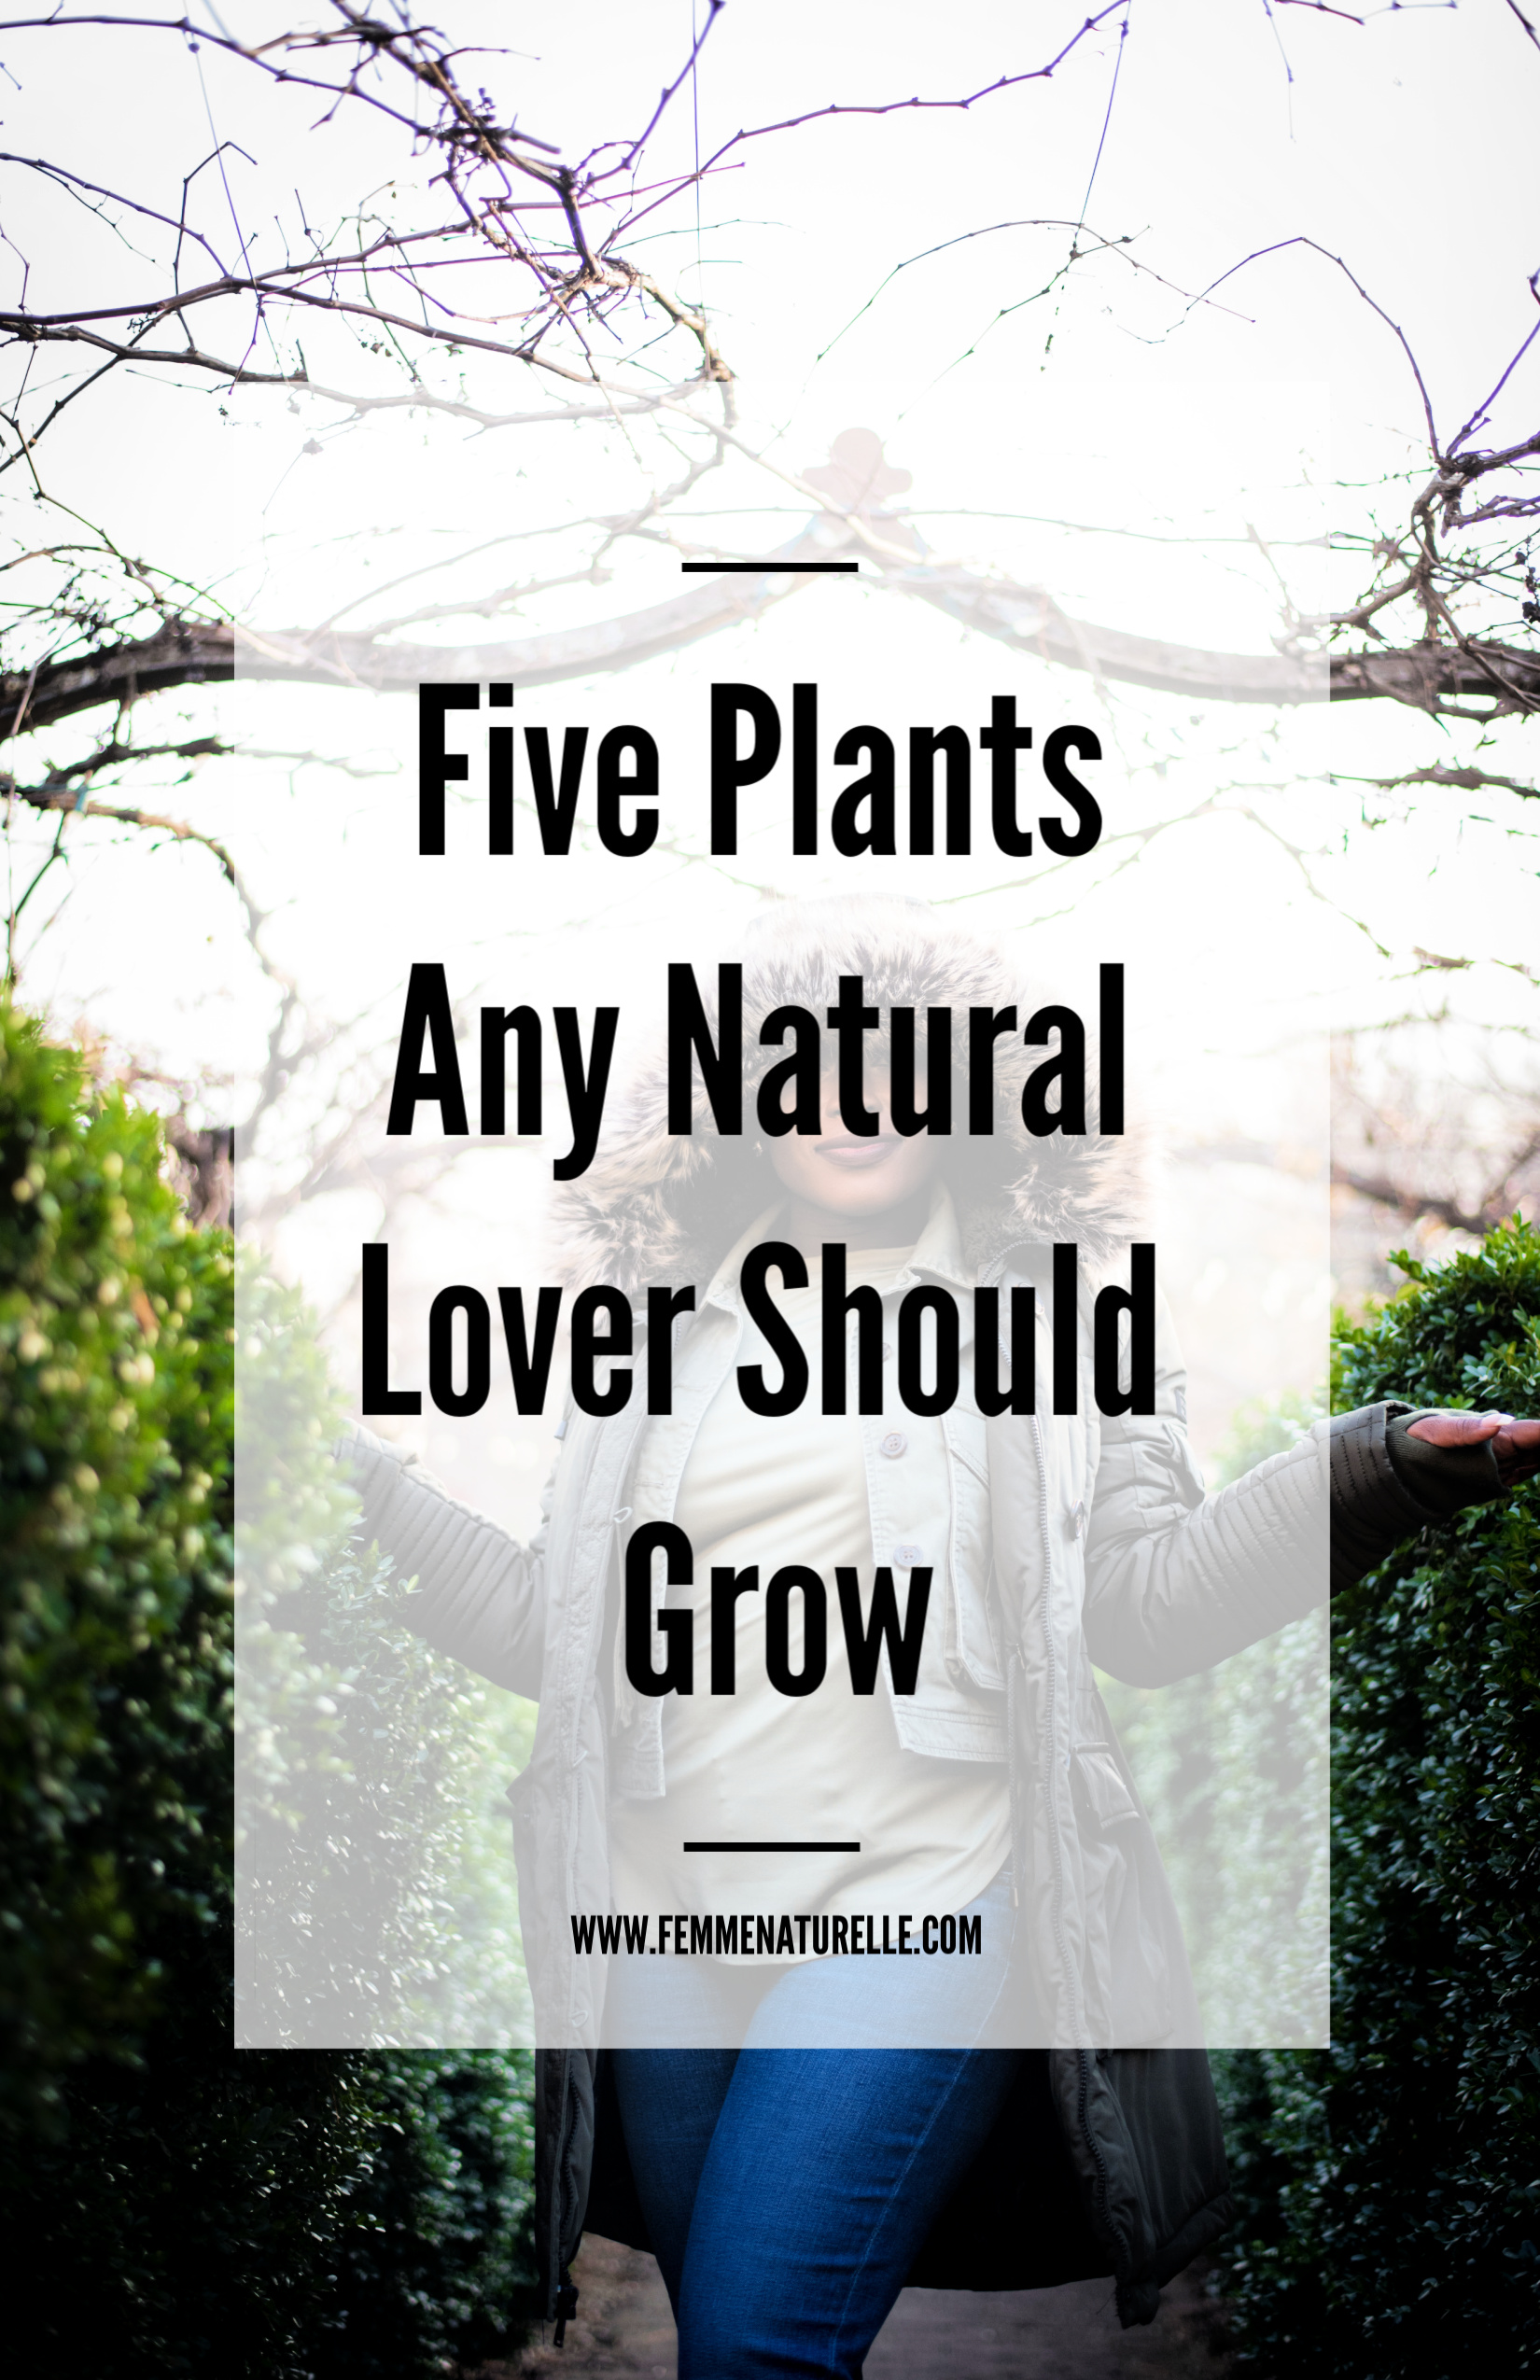 Five Plants Any Natural Lover Should Grow